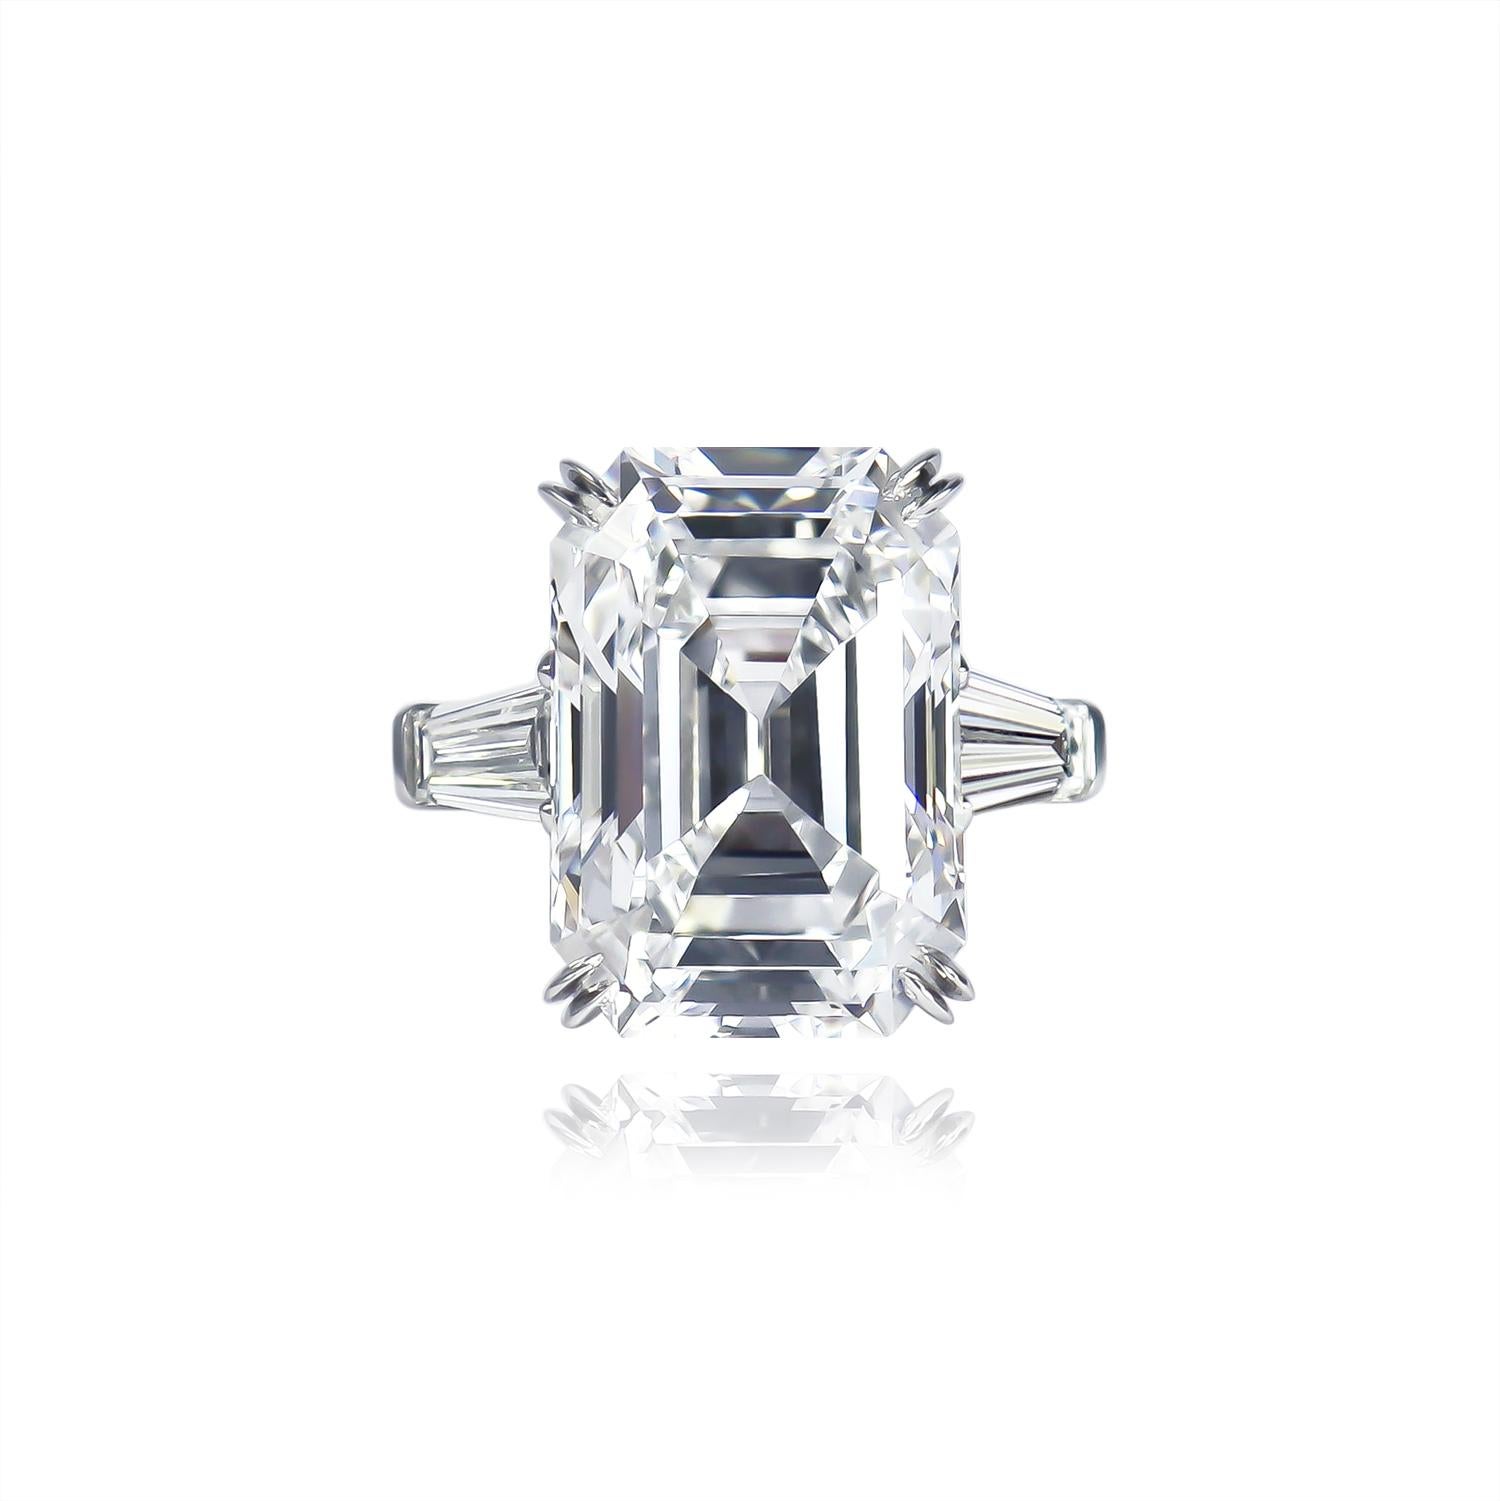 This exquisite ring from the house of Harry Winston features a 12.14 carat Emerald cut diamond of D color and Internally Flawless clarity as described by GIA grading report #5211073255. Set in a signed, platinum ring with tapered baguette side